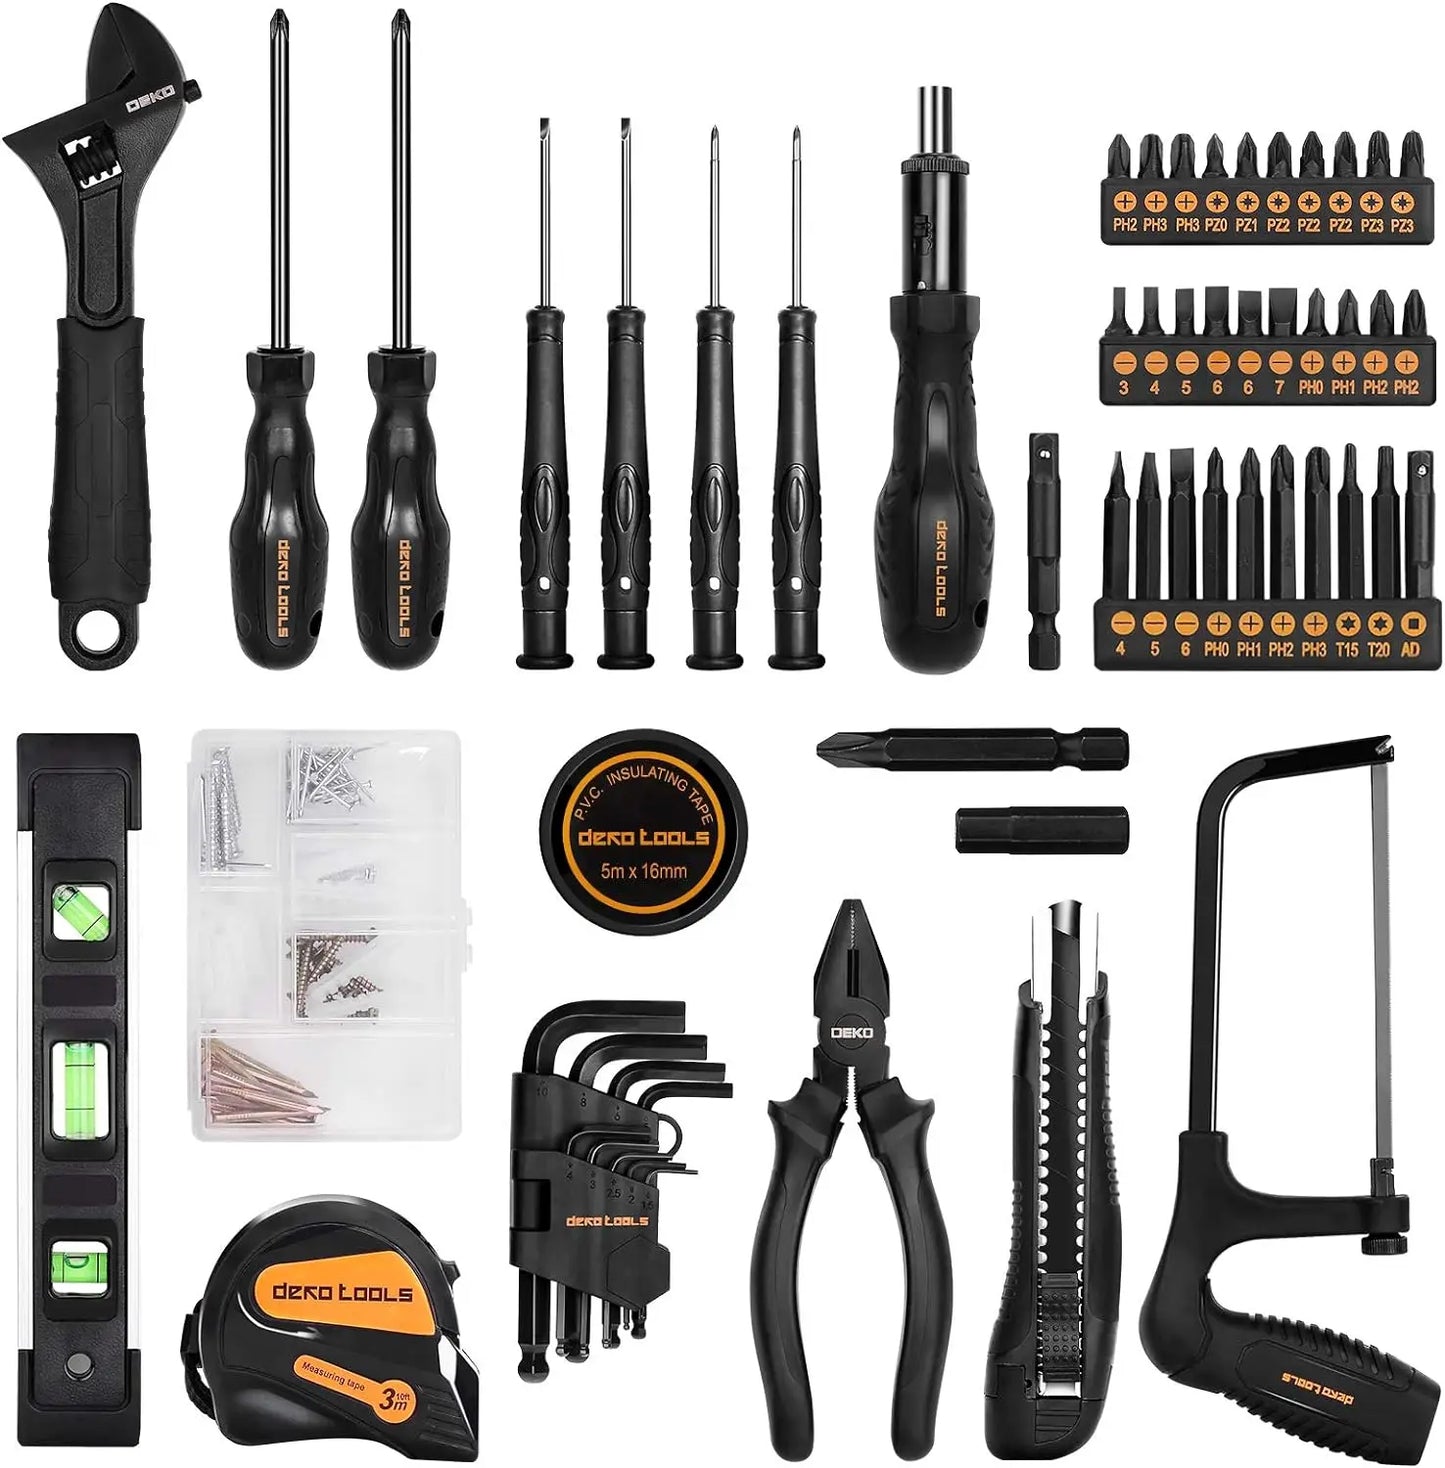 218-Piece General Household Hand Tool kit